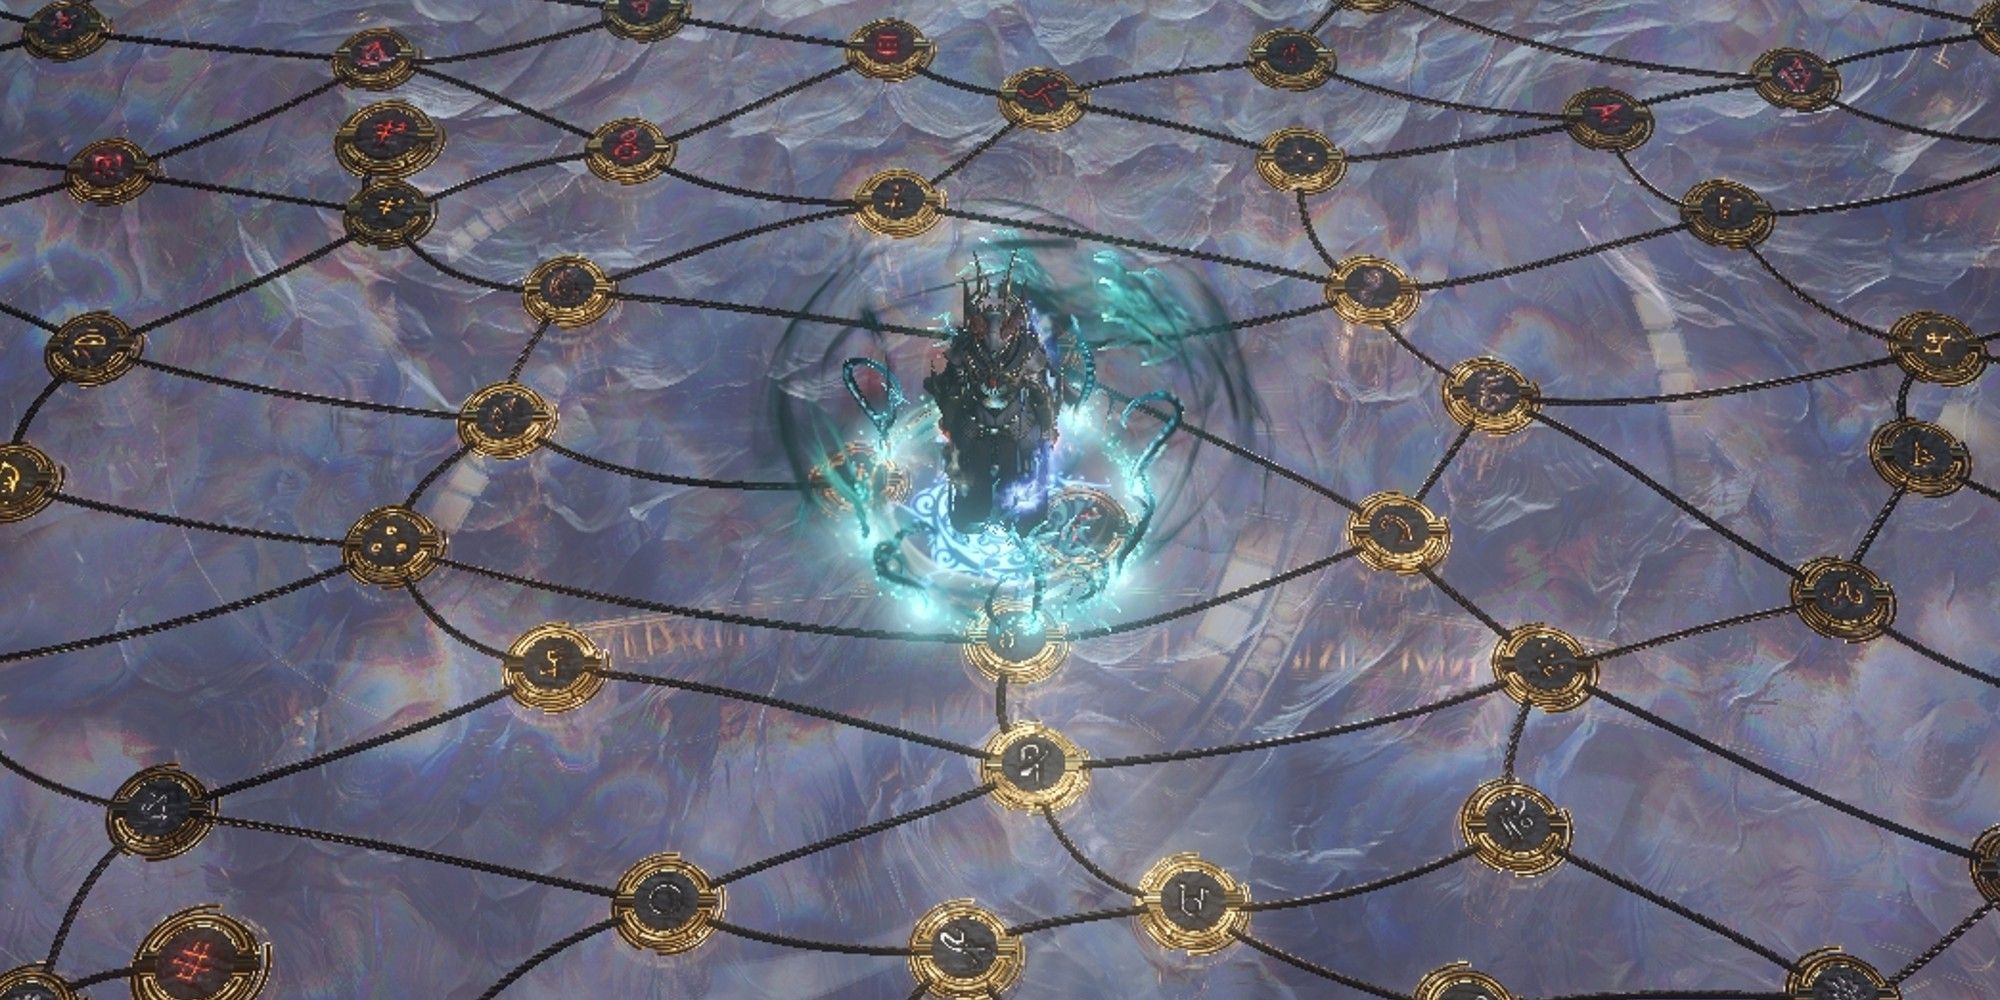 Standing in the middle of an Atlas Hideout in Path of Exile